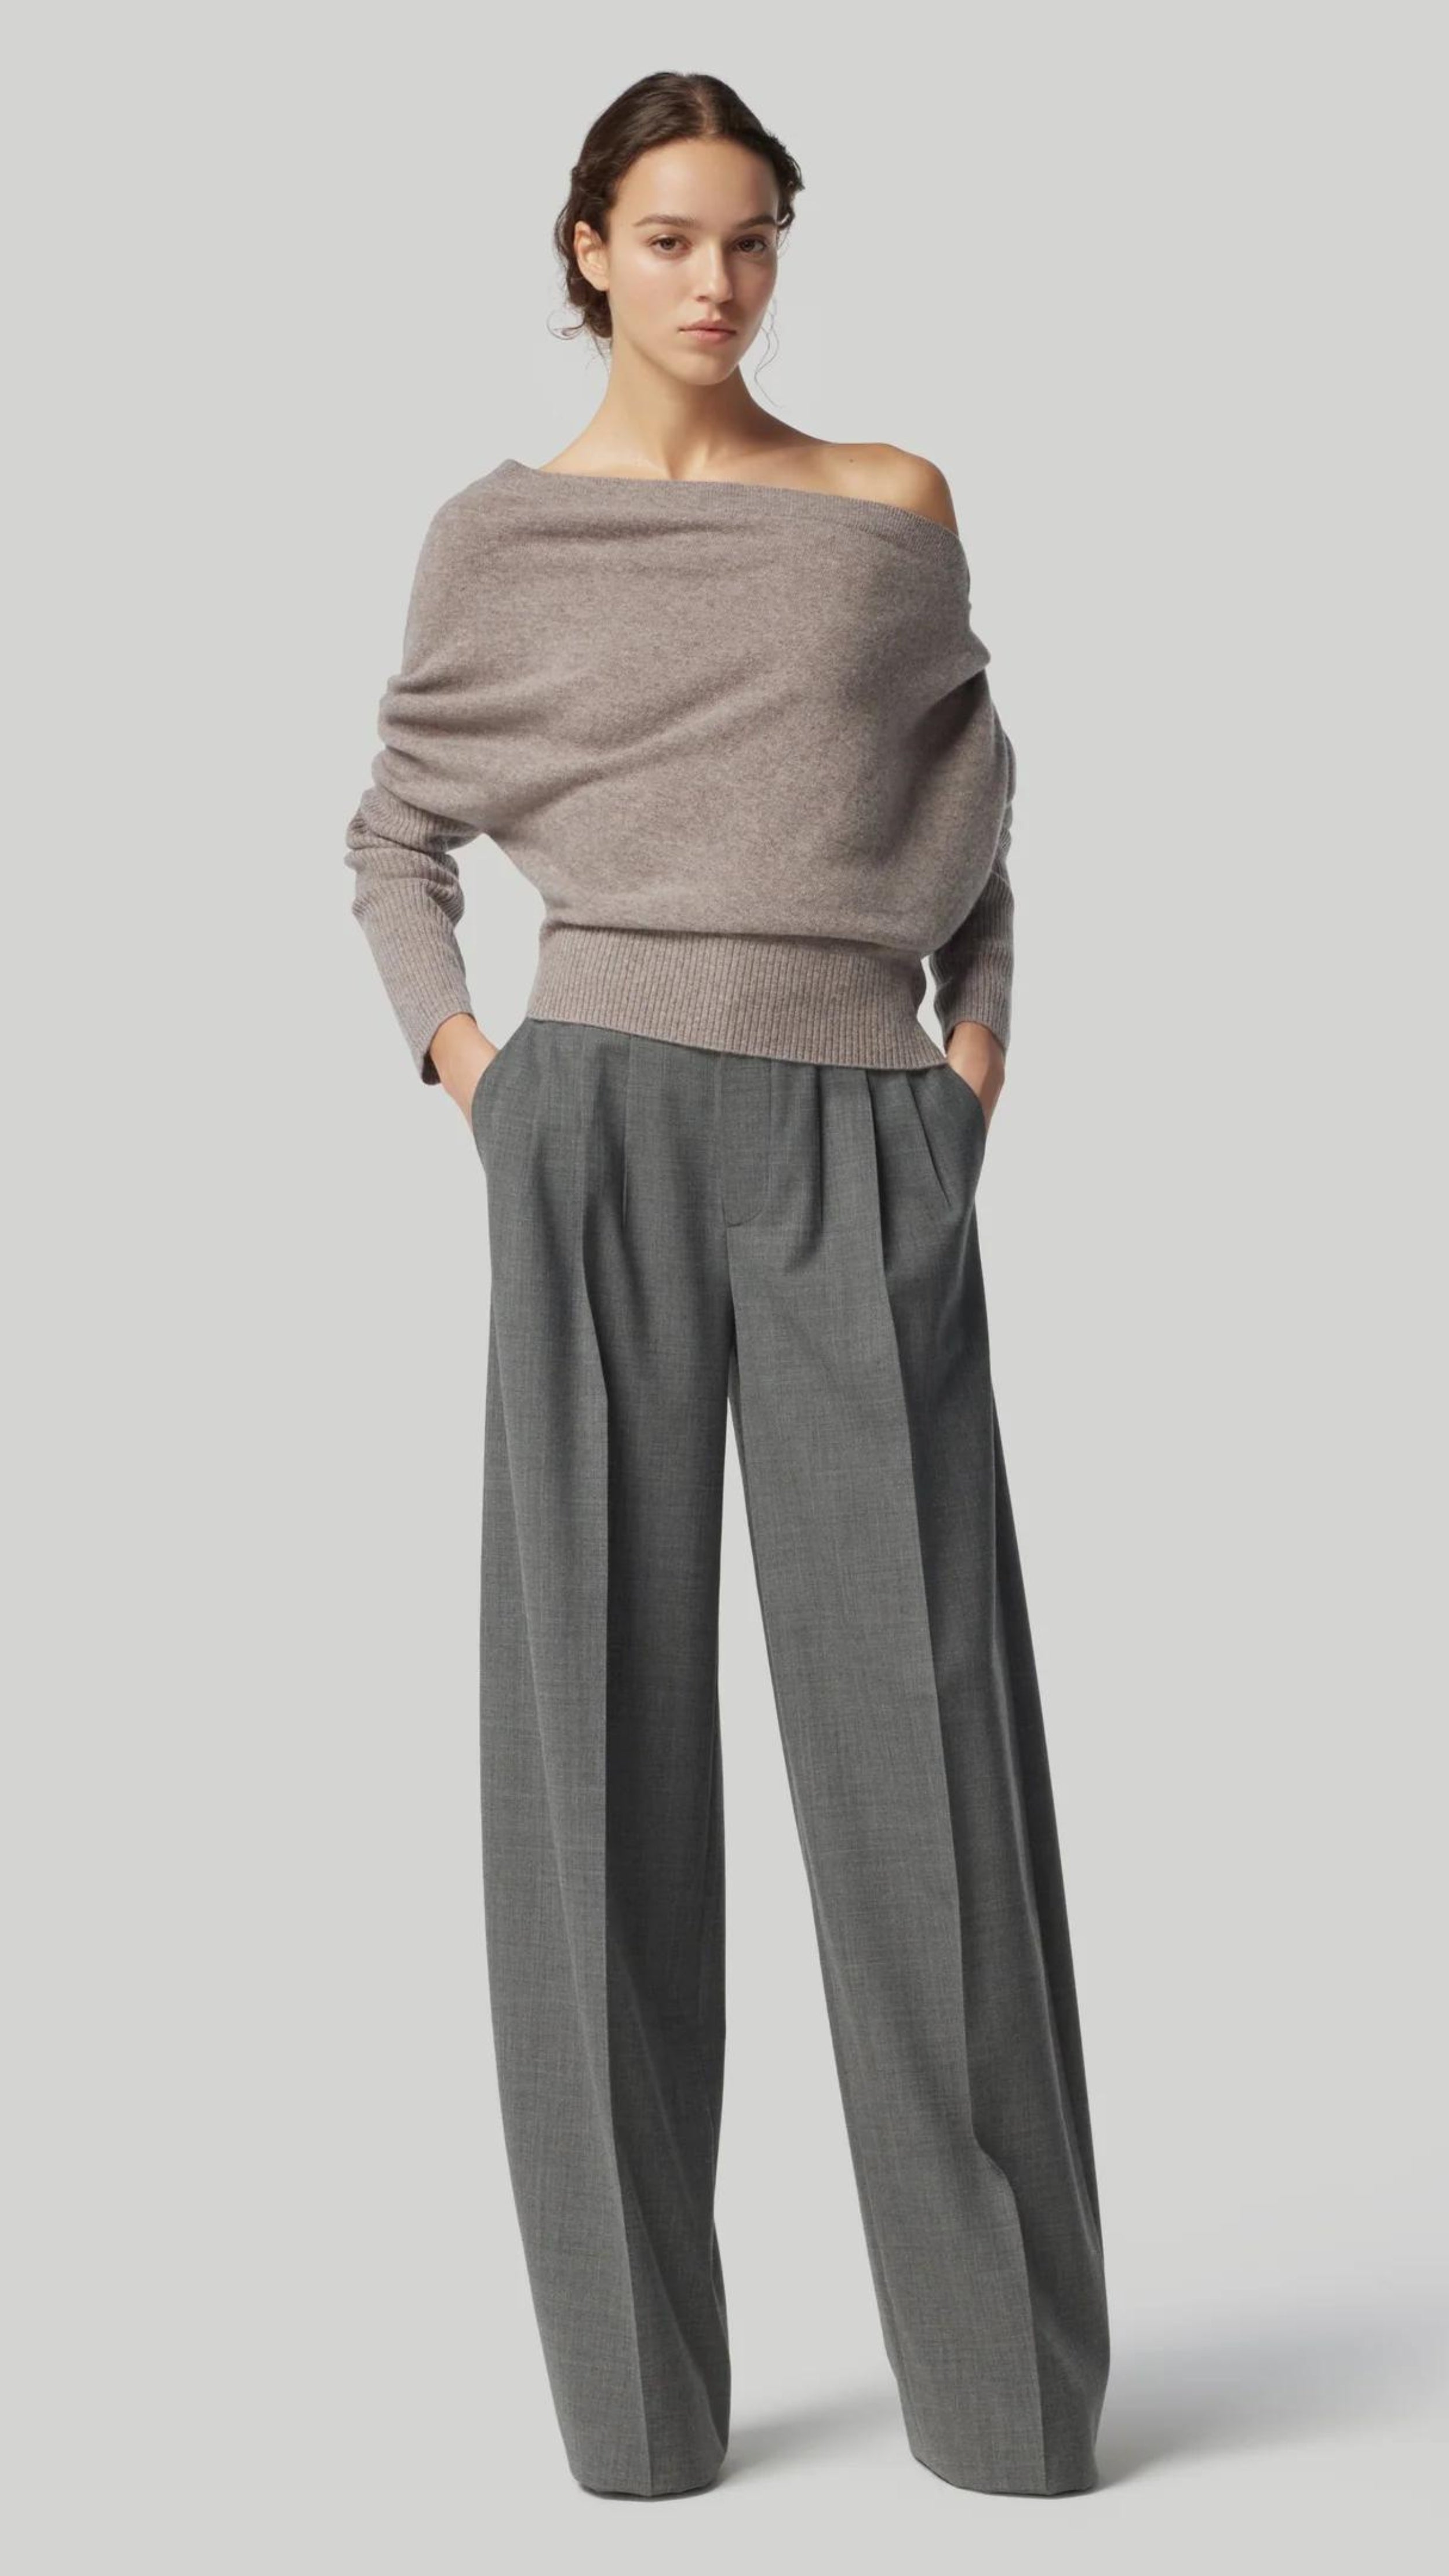 Altuzarra Paxi Cashmere Sweater in Grey. Luxury soft knit jumper in light gray, off the shoulder style. With a fitted waist line and sleeves for an elegantly casual look. Shown on model facing front.